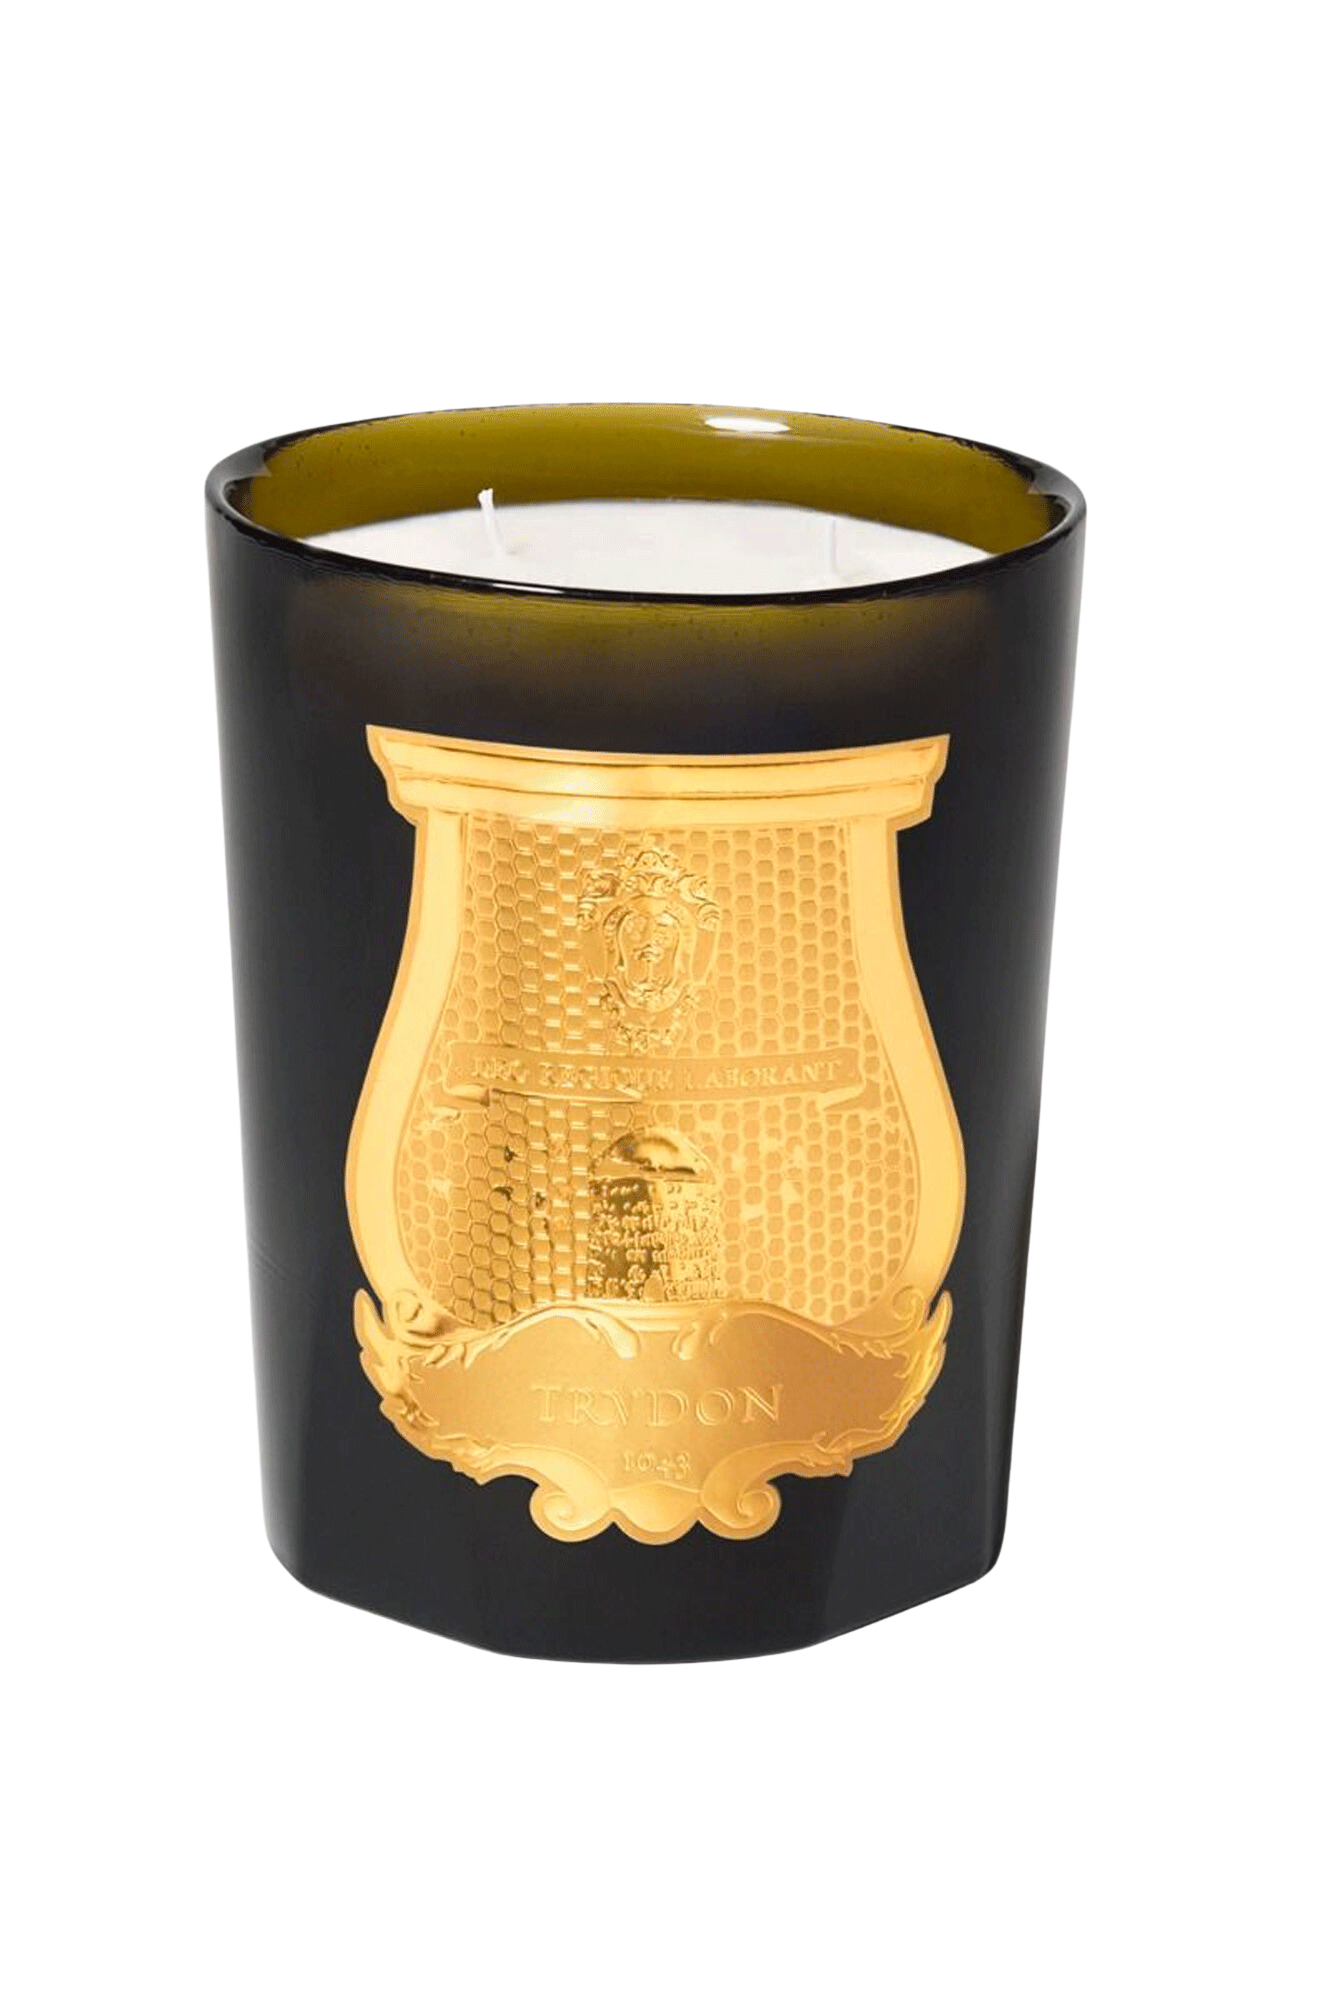 It stands out: with three wicks, the Intermezzo Candle is best placed in large rooms, where it will adorn a chimney or an elegant dinner table. They are manufactured at the Trudon workshop in Normandy, France, using unrivaled know-how inherited from master candle makers.